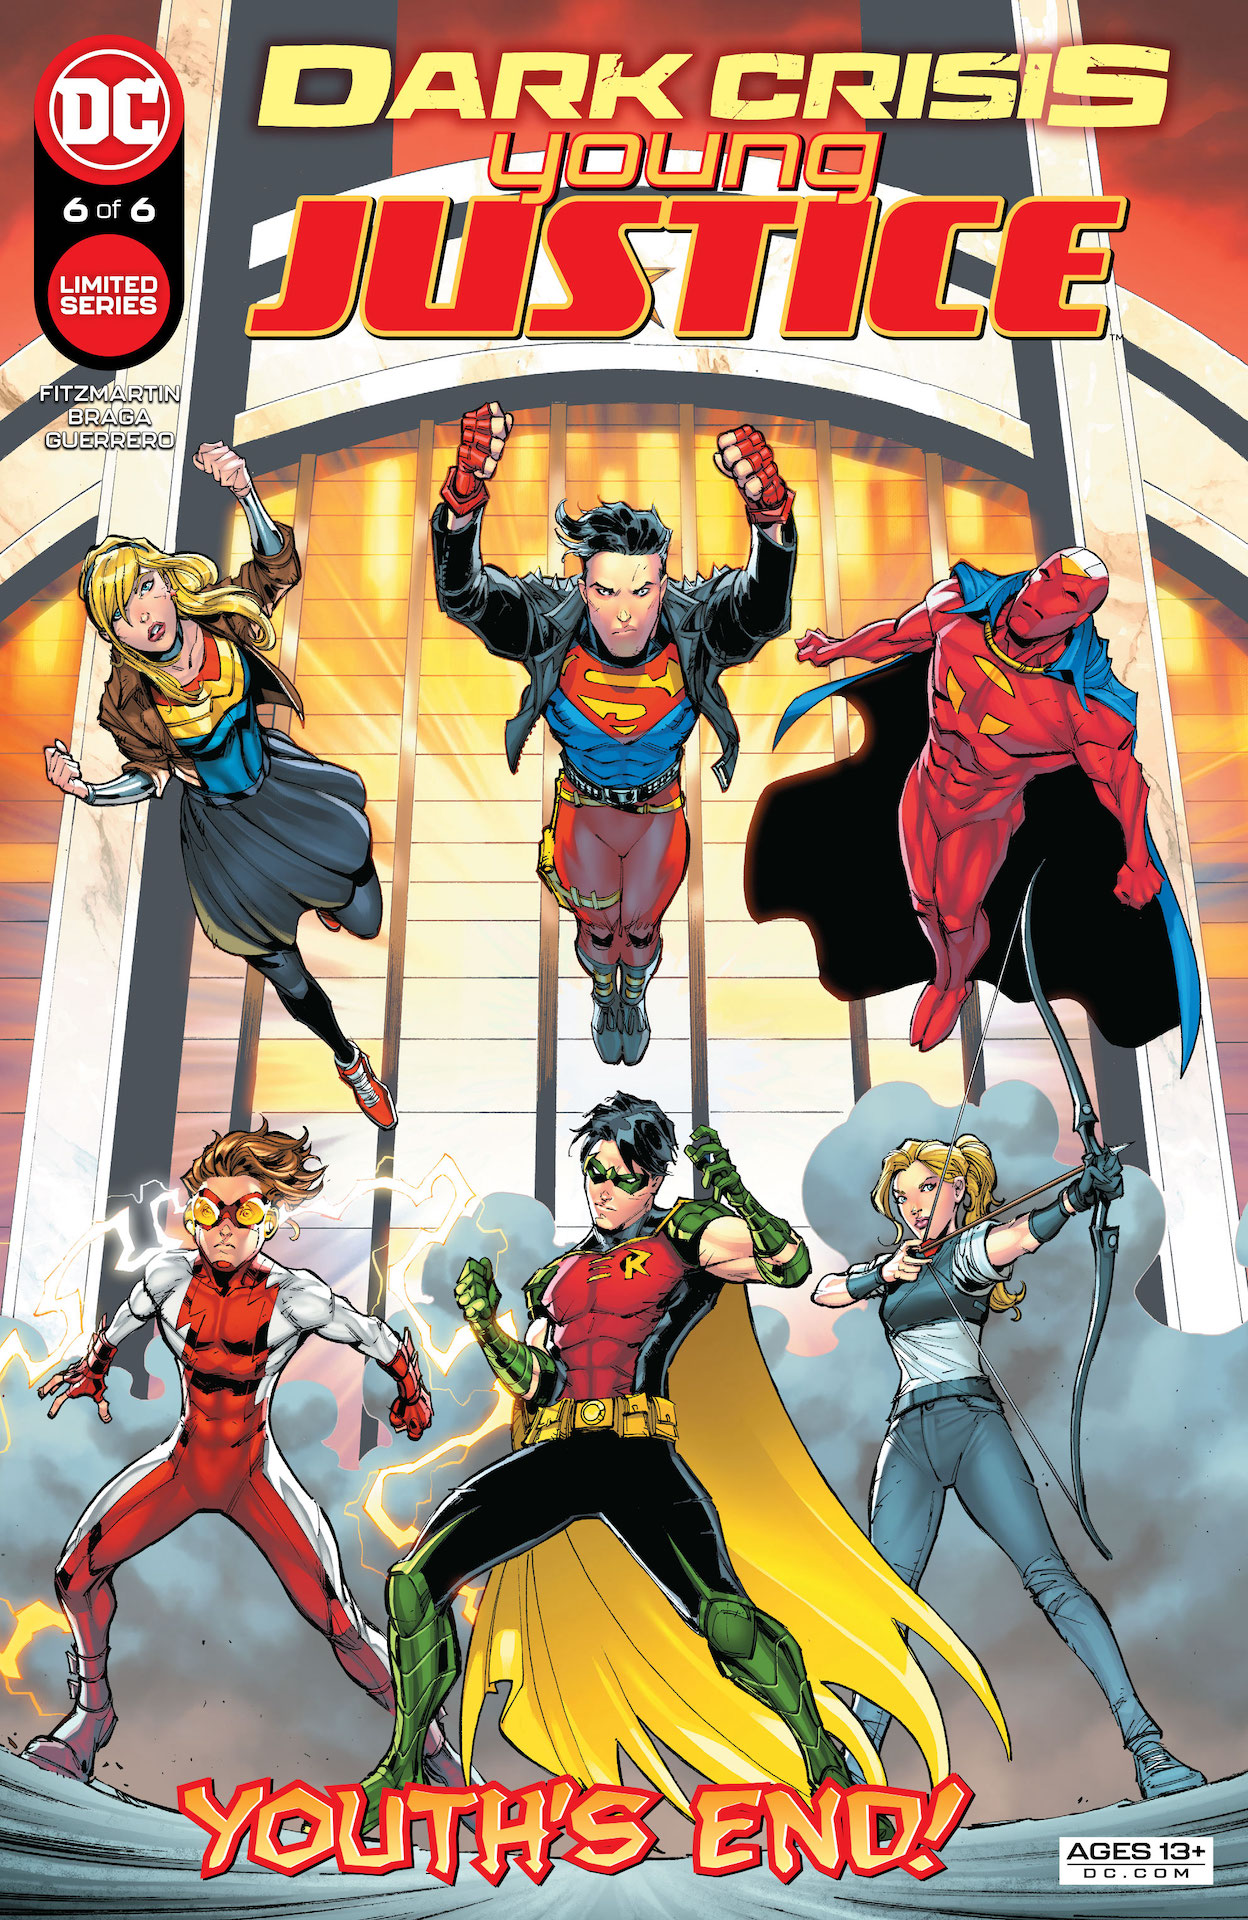 DC Preview: Dark Crisis: Young Justice #6